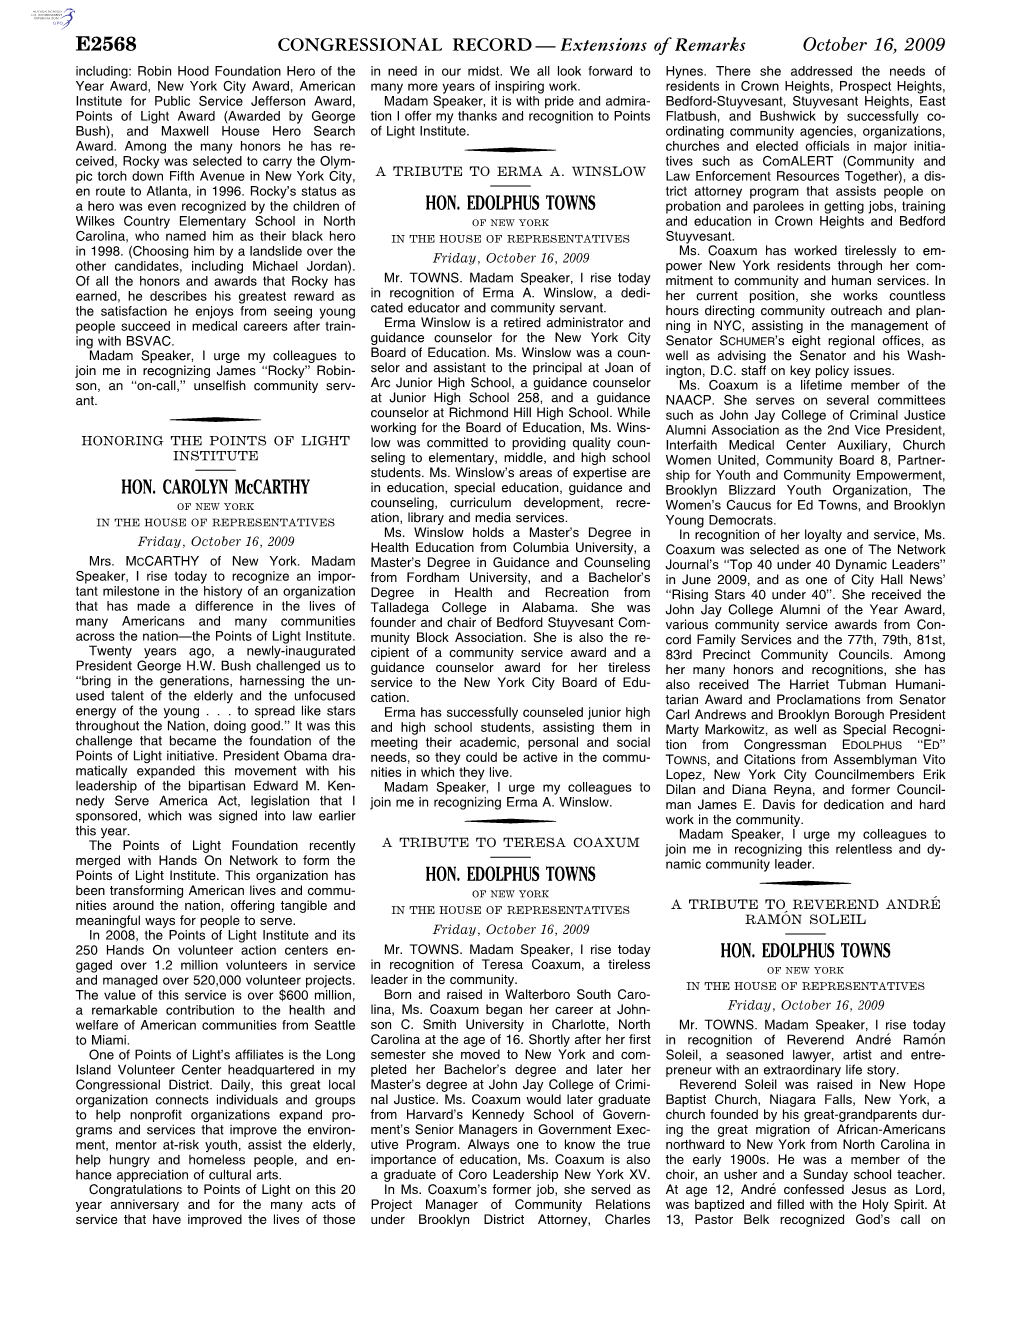 CONGRESSIONAL RECORD— Extensions of Remarks E2568